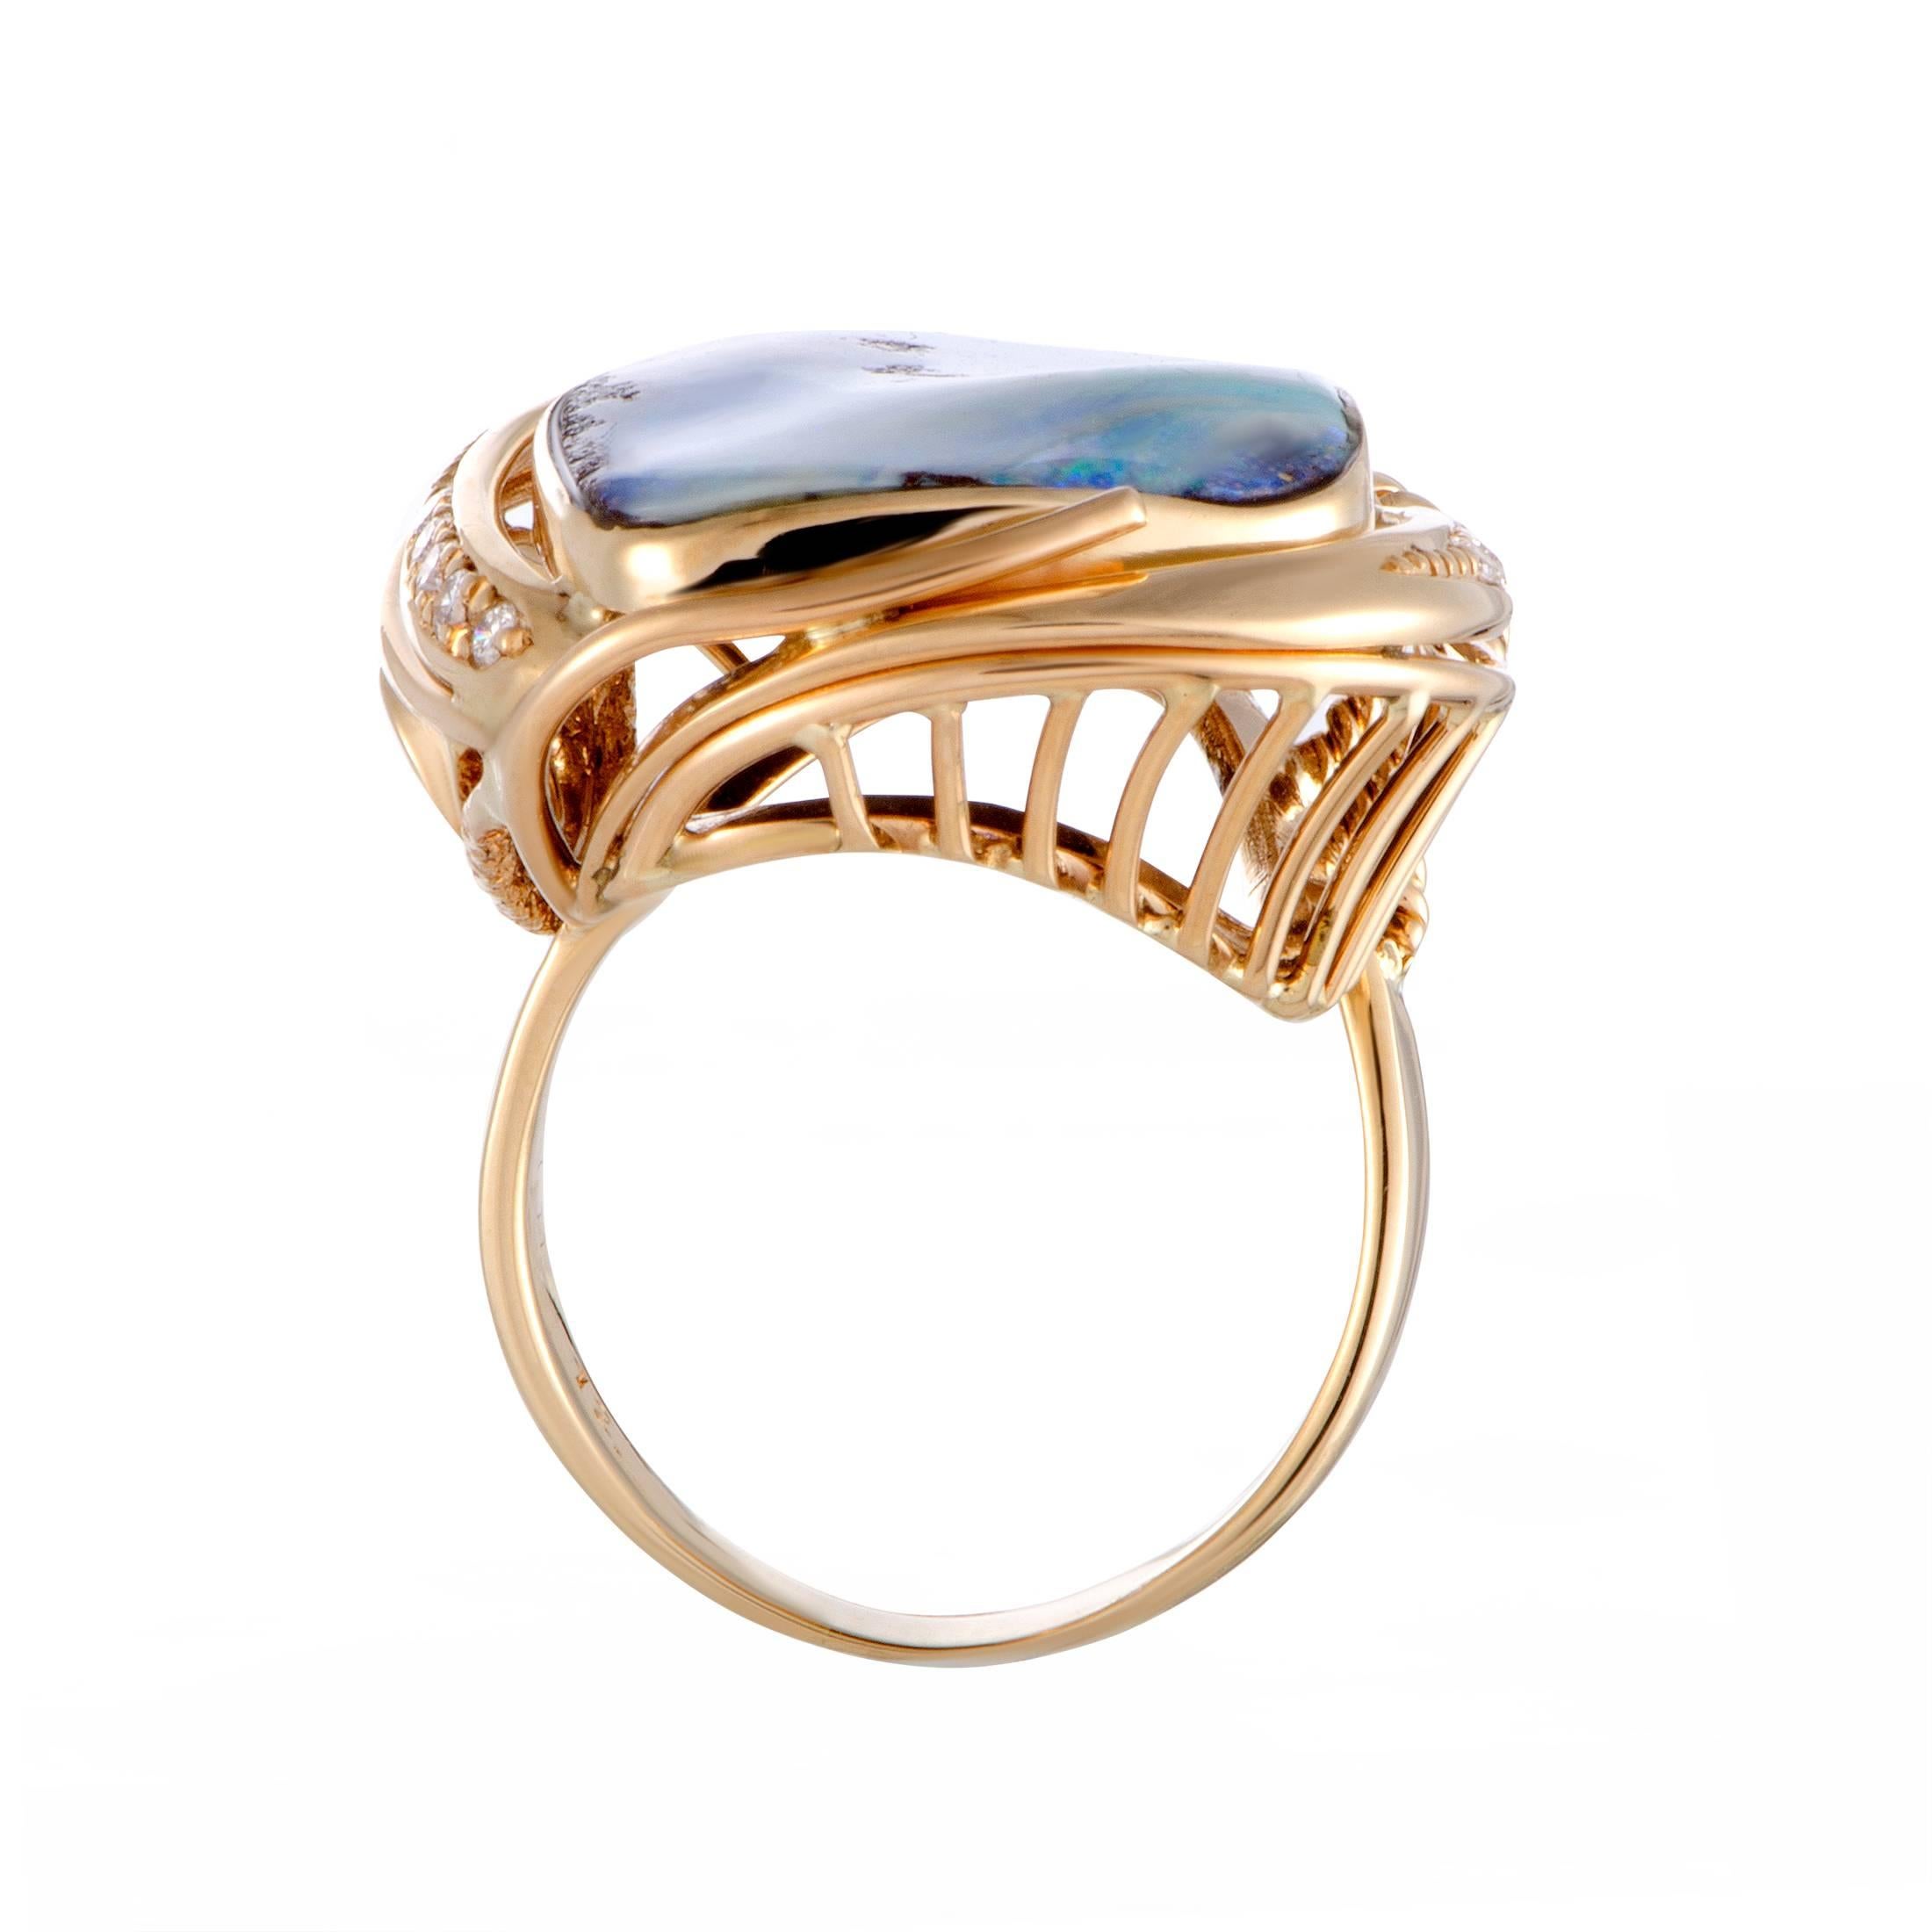 The star of the show in this spectacular ring is the captivating opal with its sublime, endearing shades. This exquisite stone is wonderfully complemented by the alluring 18K yellow gold accentuated with scintillating diamonds that weigh 0.10 carats